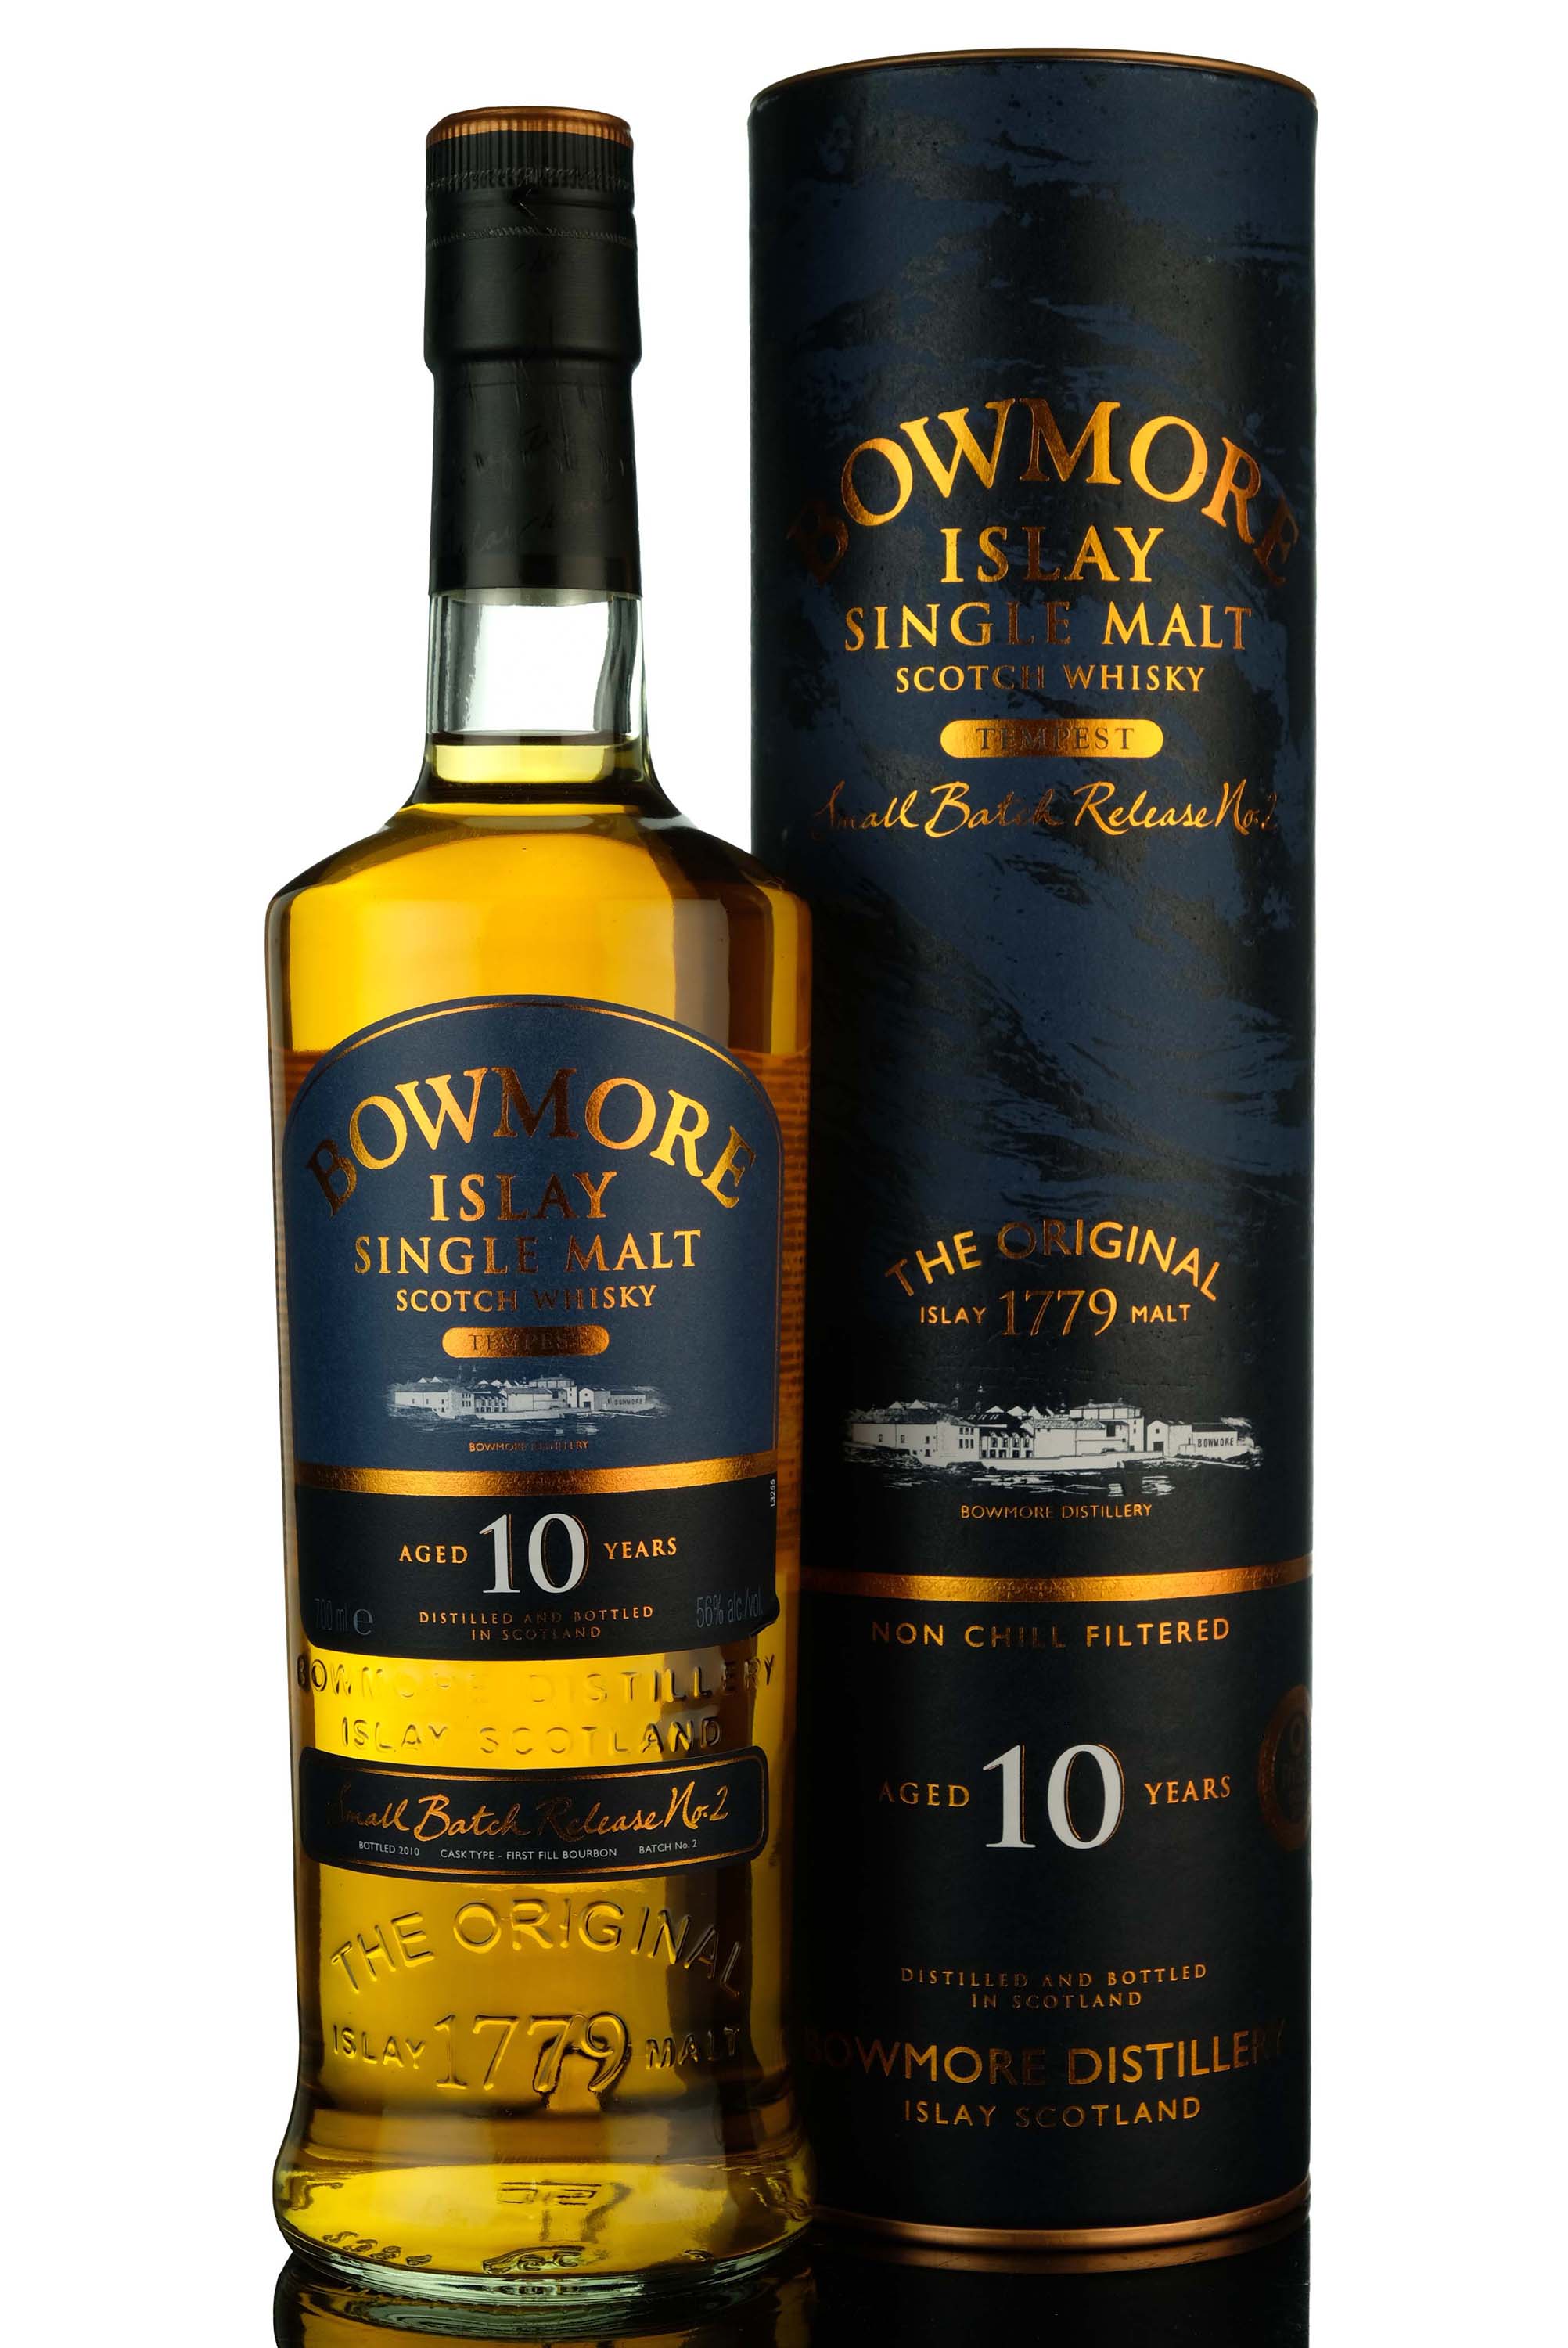 Bowmore 10 Year Old - Tempest Batch 2 - 2010 Release